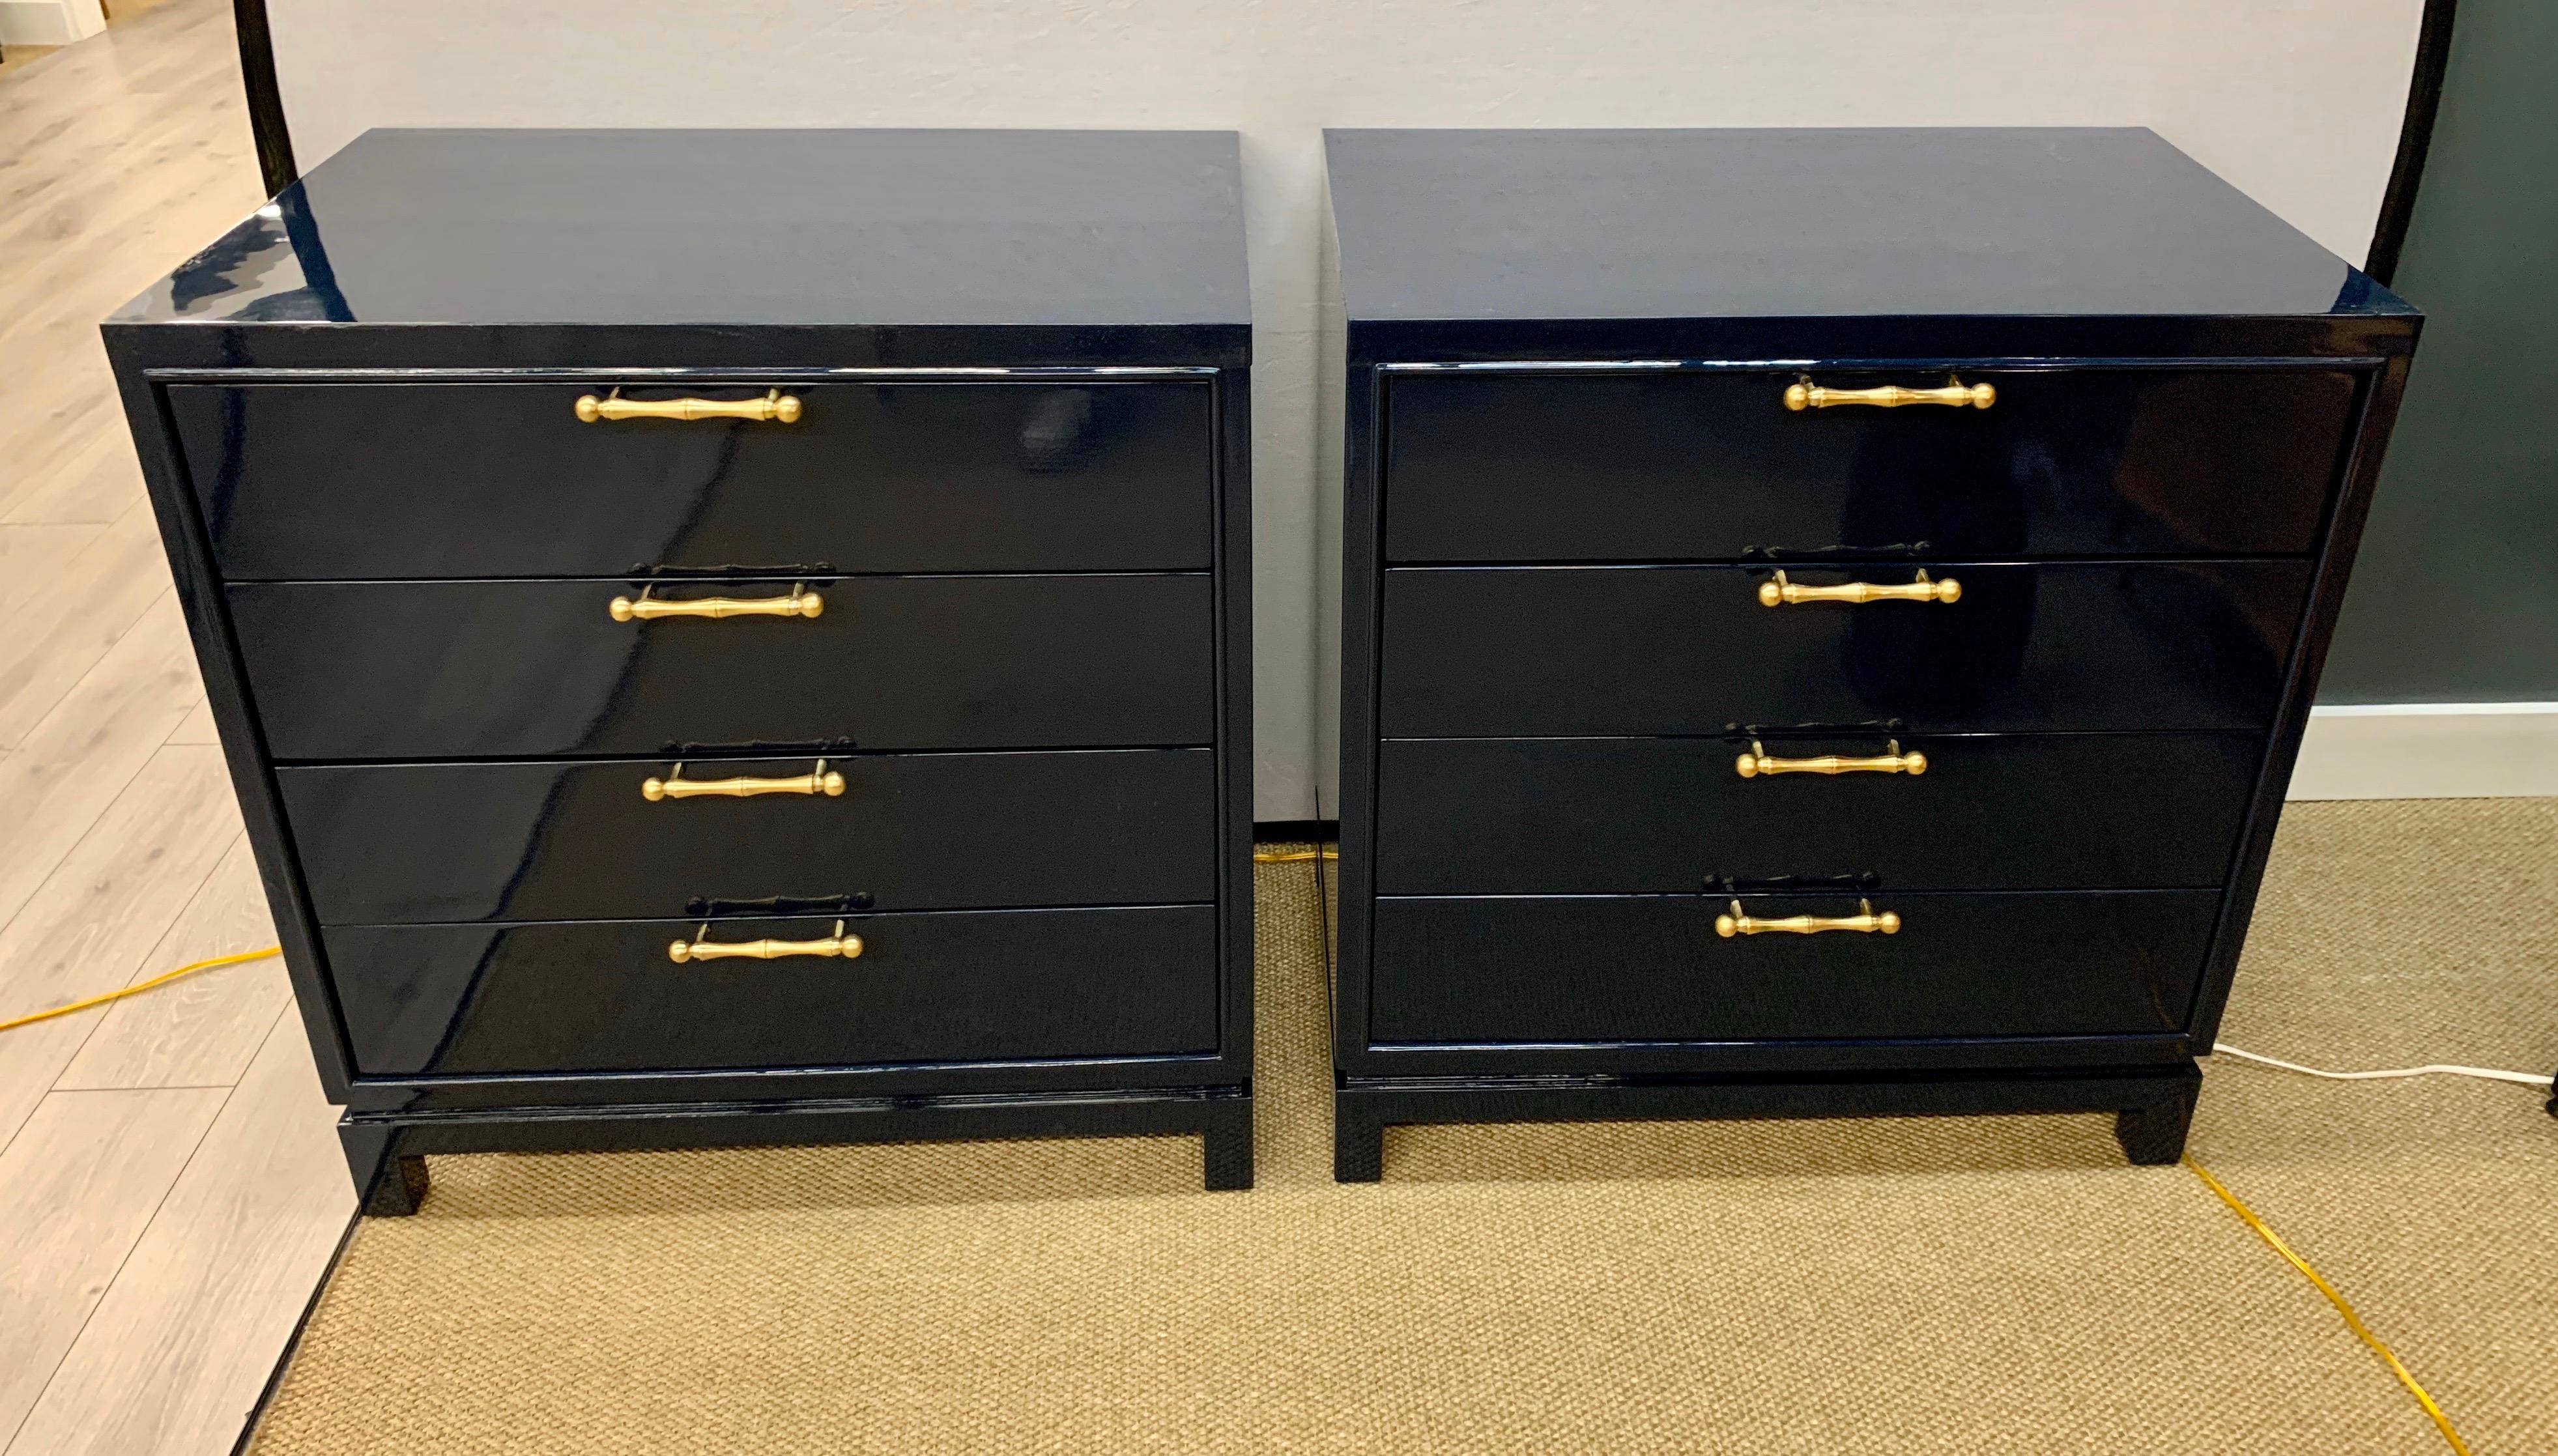 Elegant, newly lacquered navy blue chests featuring four drawers. Magnificent navy and blue lacquer offset with gold brass hardware. An iconic midcentury set in excellent condition.